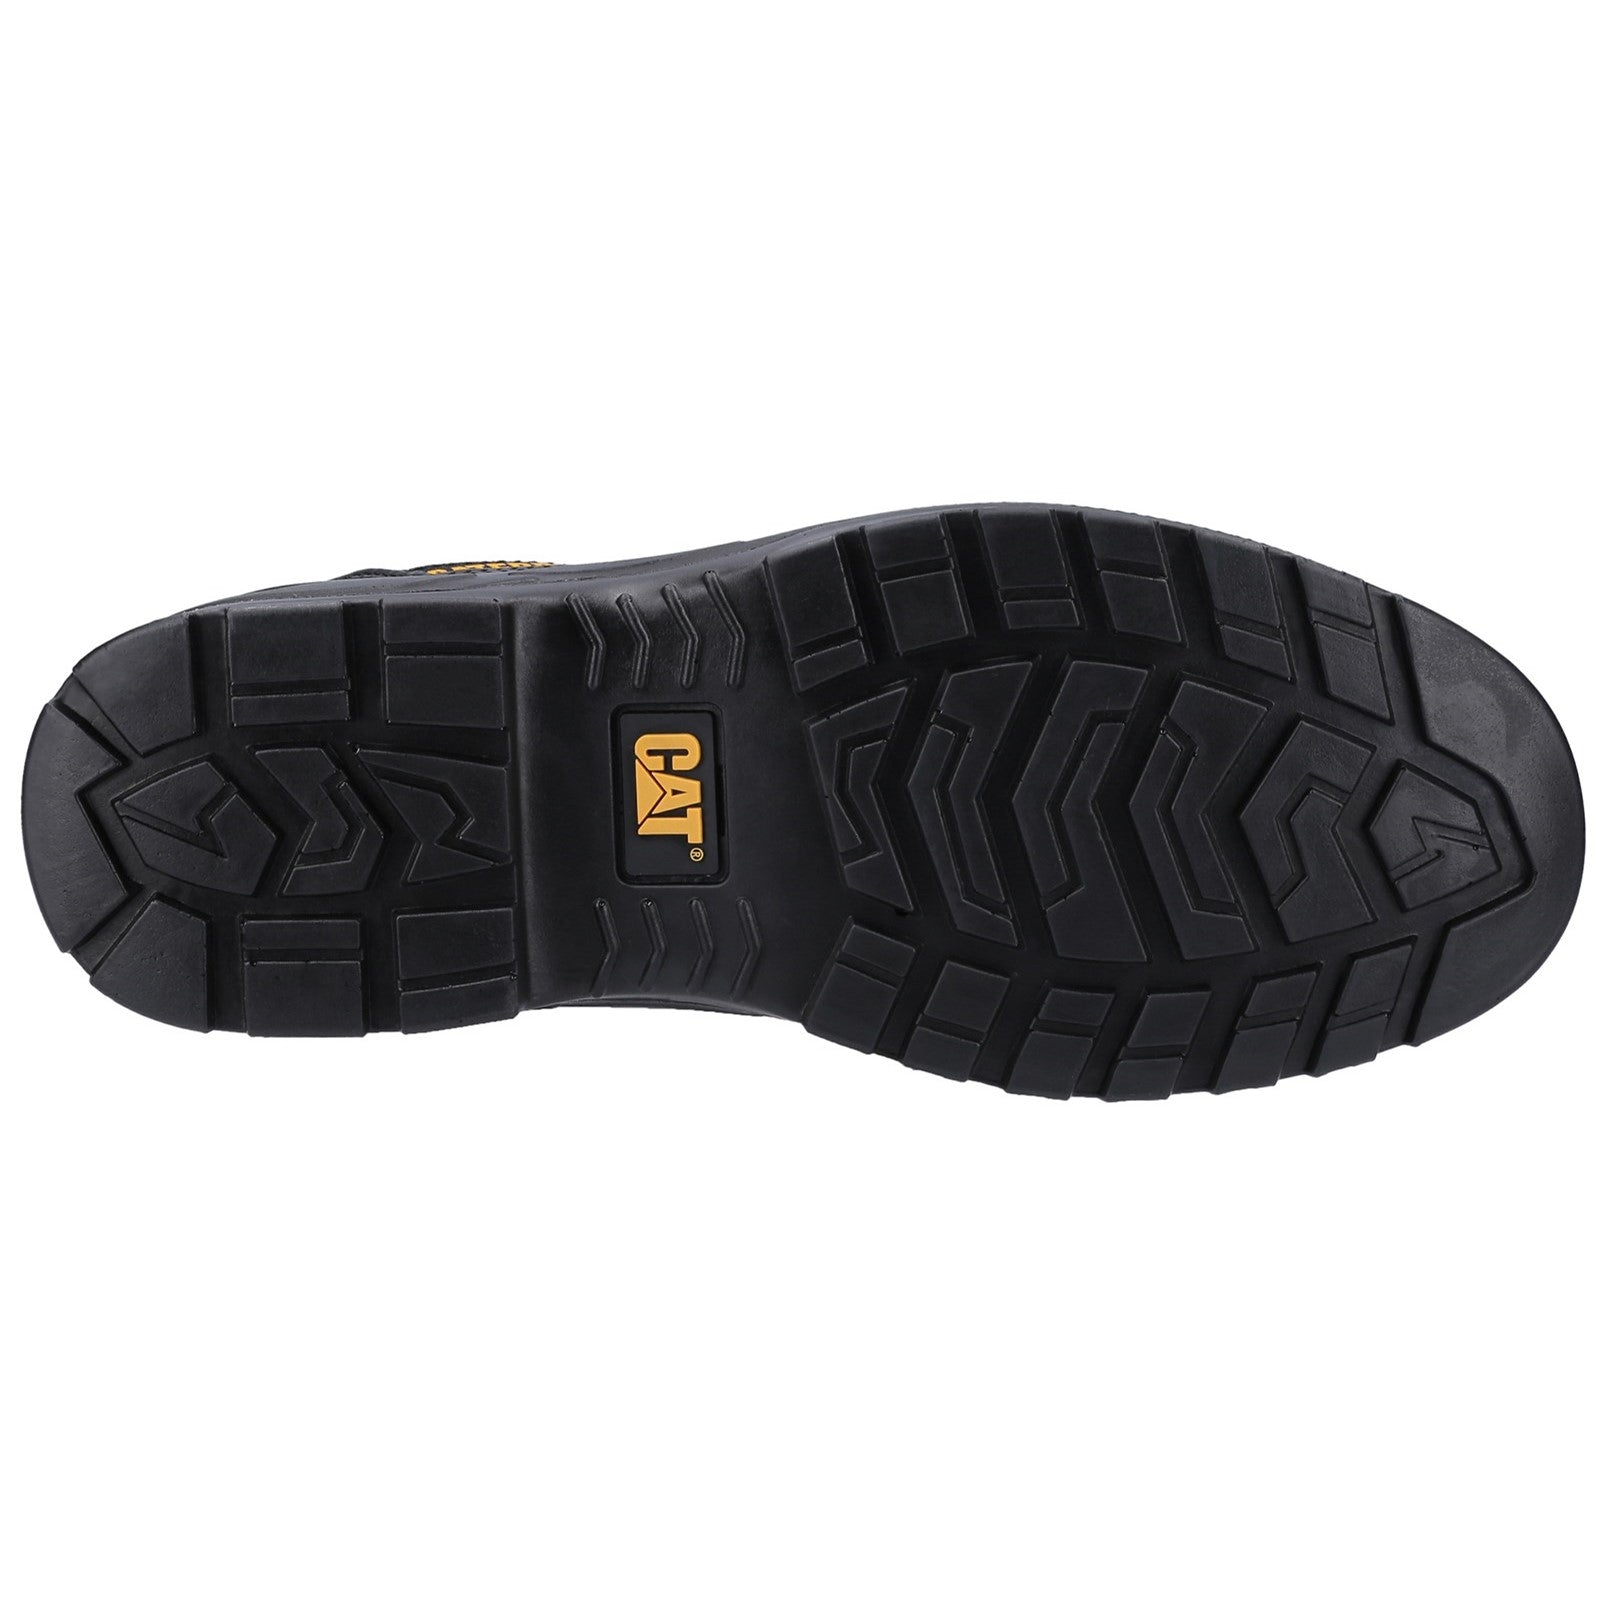 Caterpillar Striver Low S3 Safety Shoe in Black